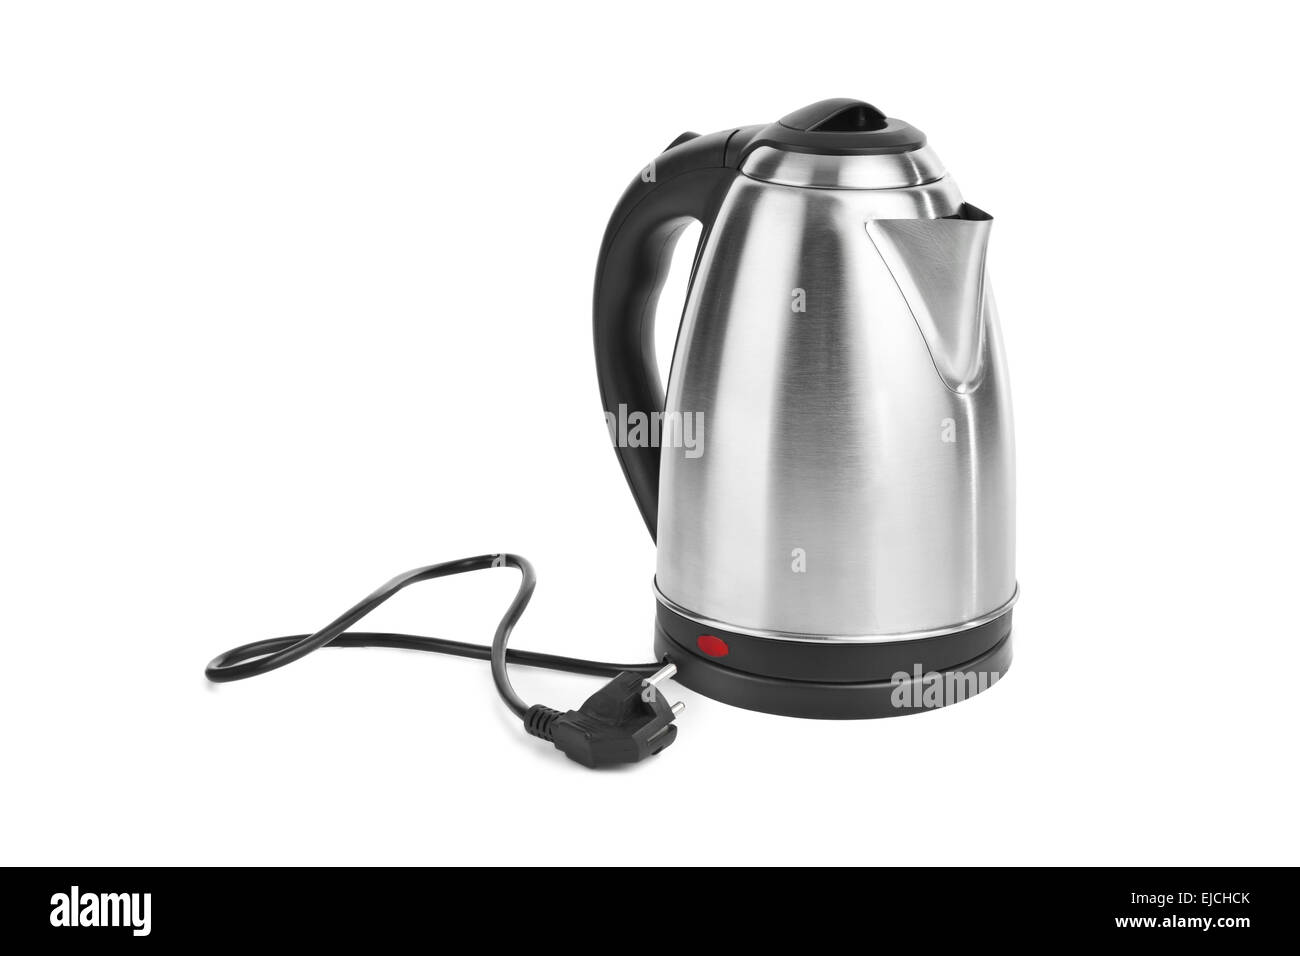 White electric kettle stands on a gray table plugged into a power outlet  Stock Photo - Alamy